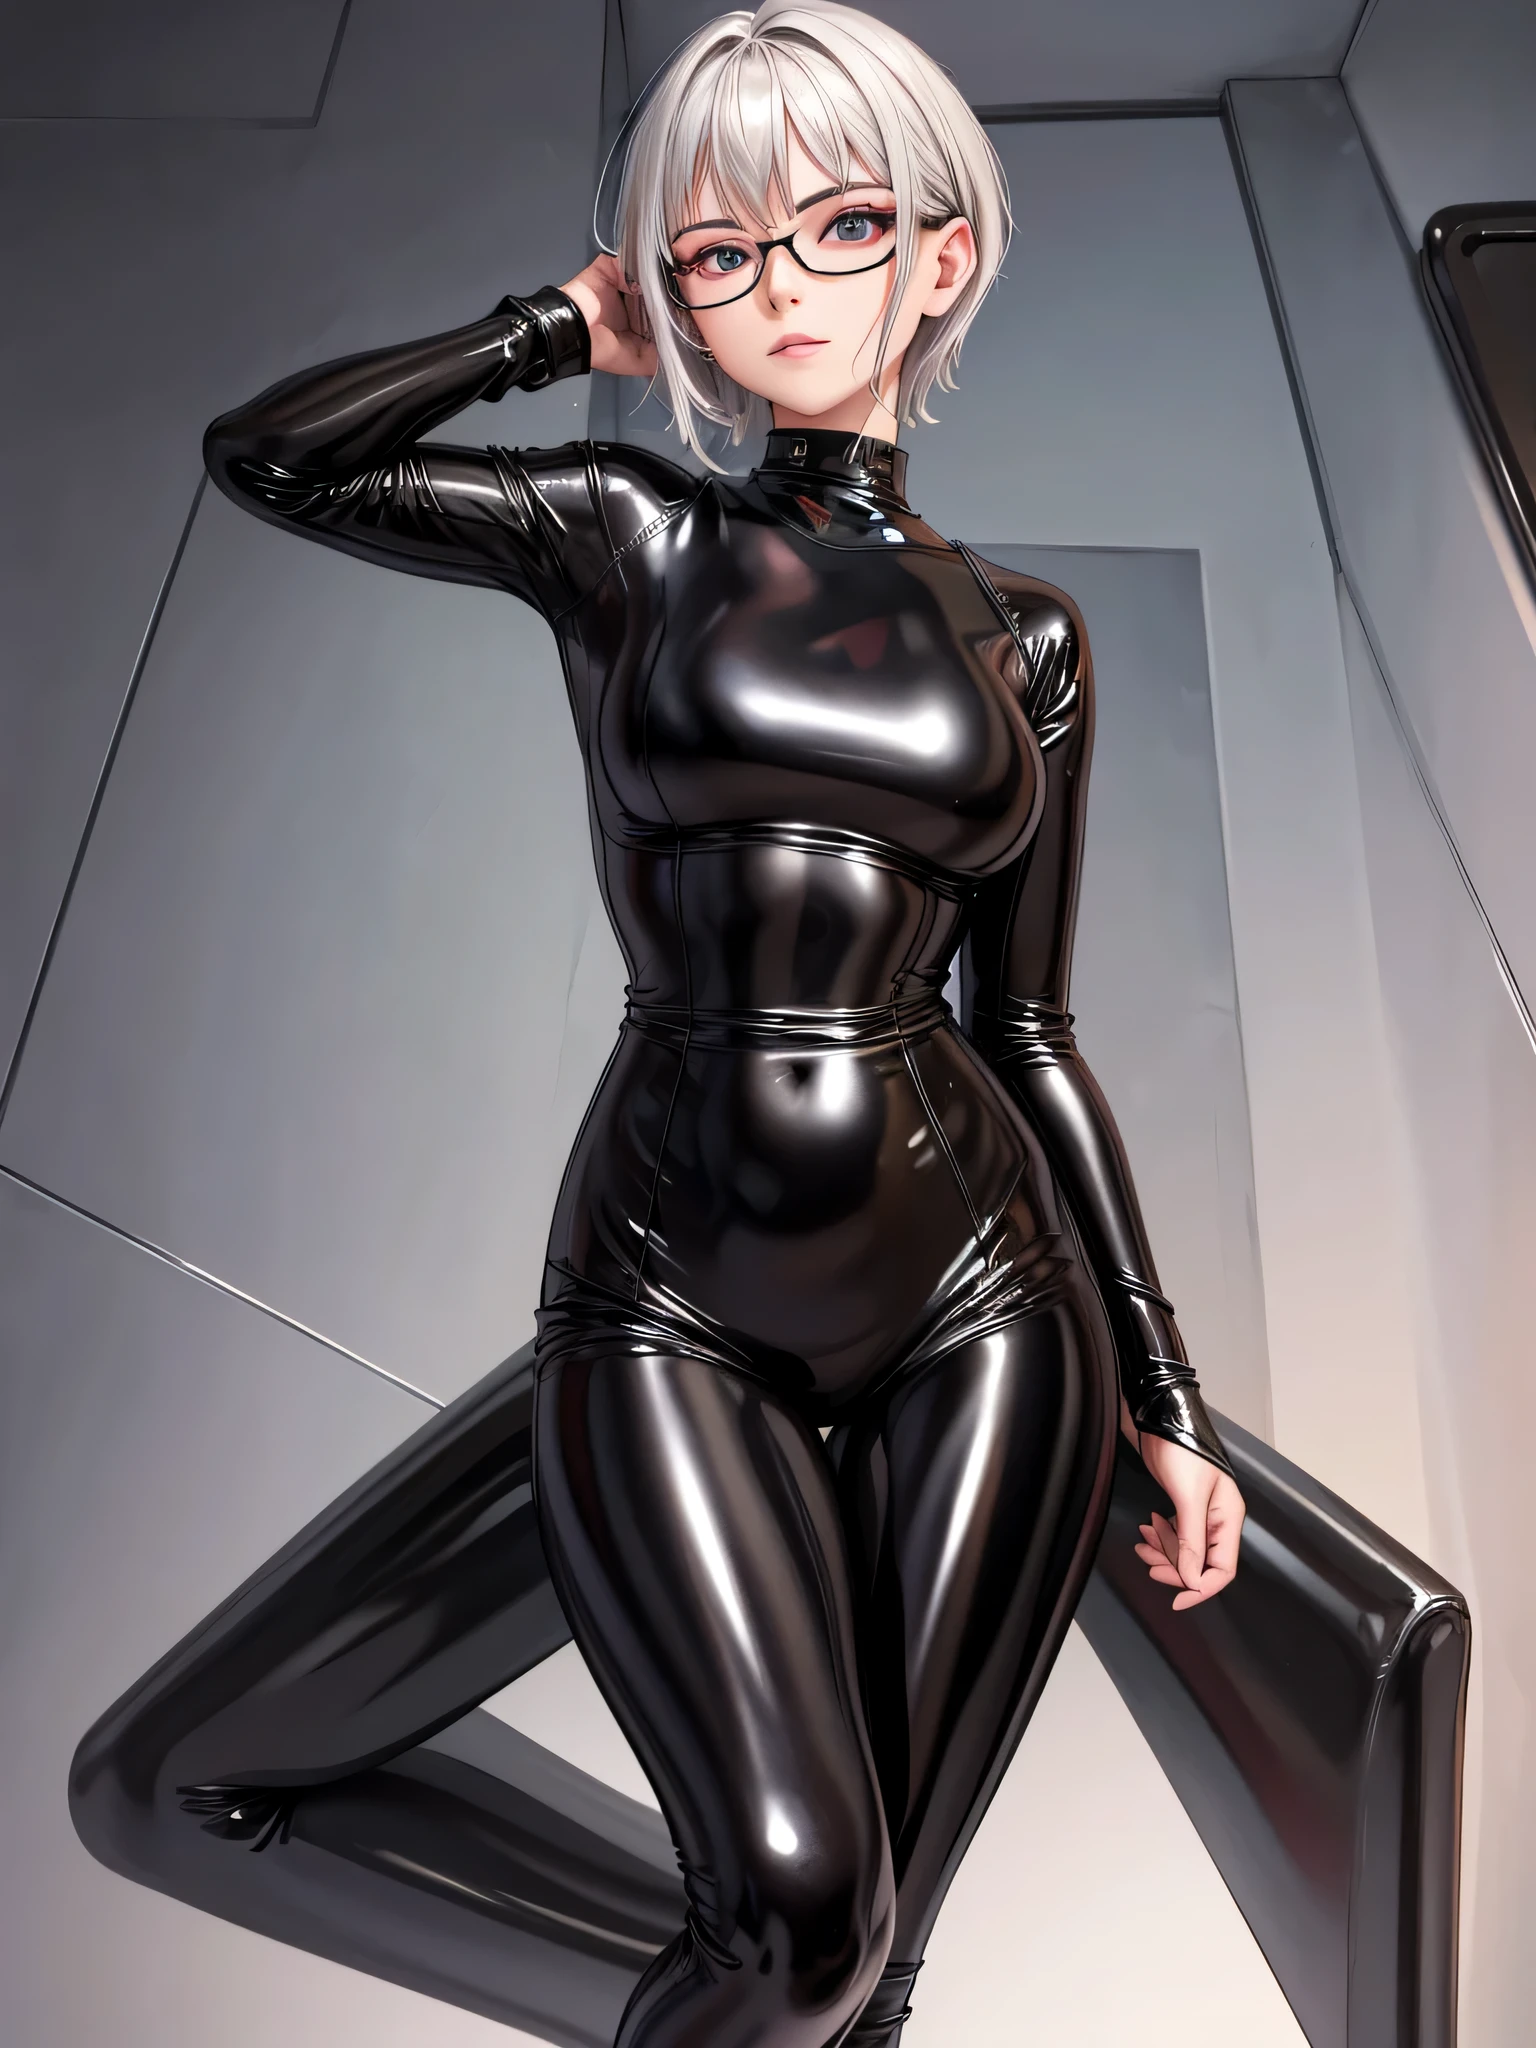 Top quality 8K UHD、Wearing glasses、Beautiful woman with short hair and silver hair in a black metallic latex sweatsuit is posing with legs apart。.、black metallic latex sweatsuit with hidden skin